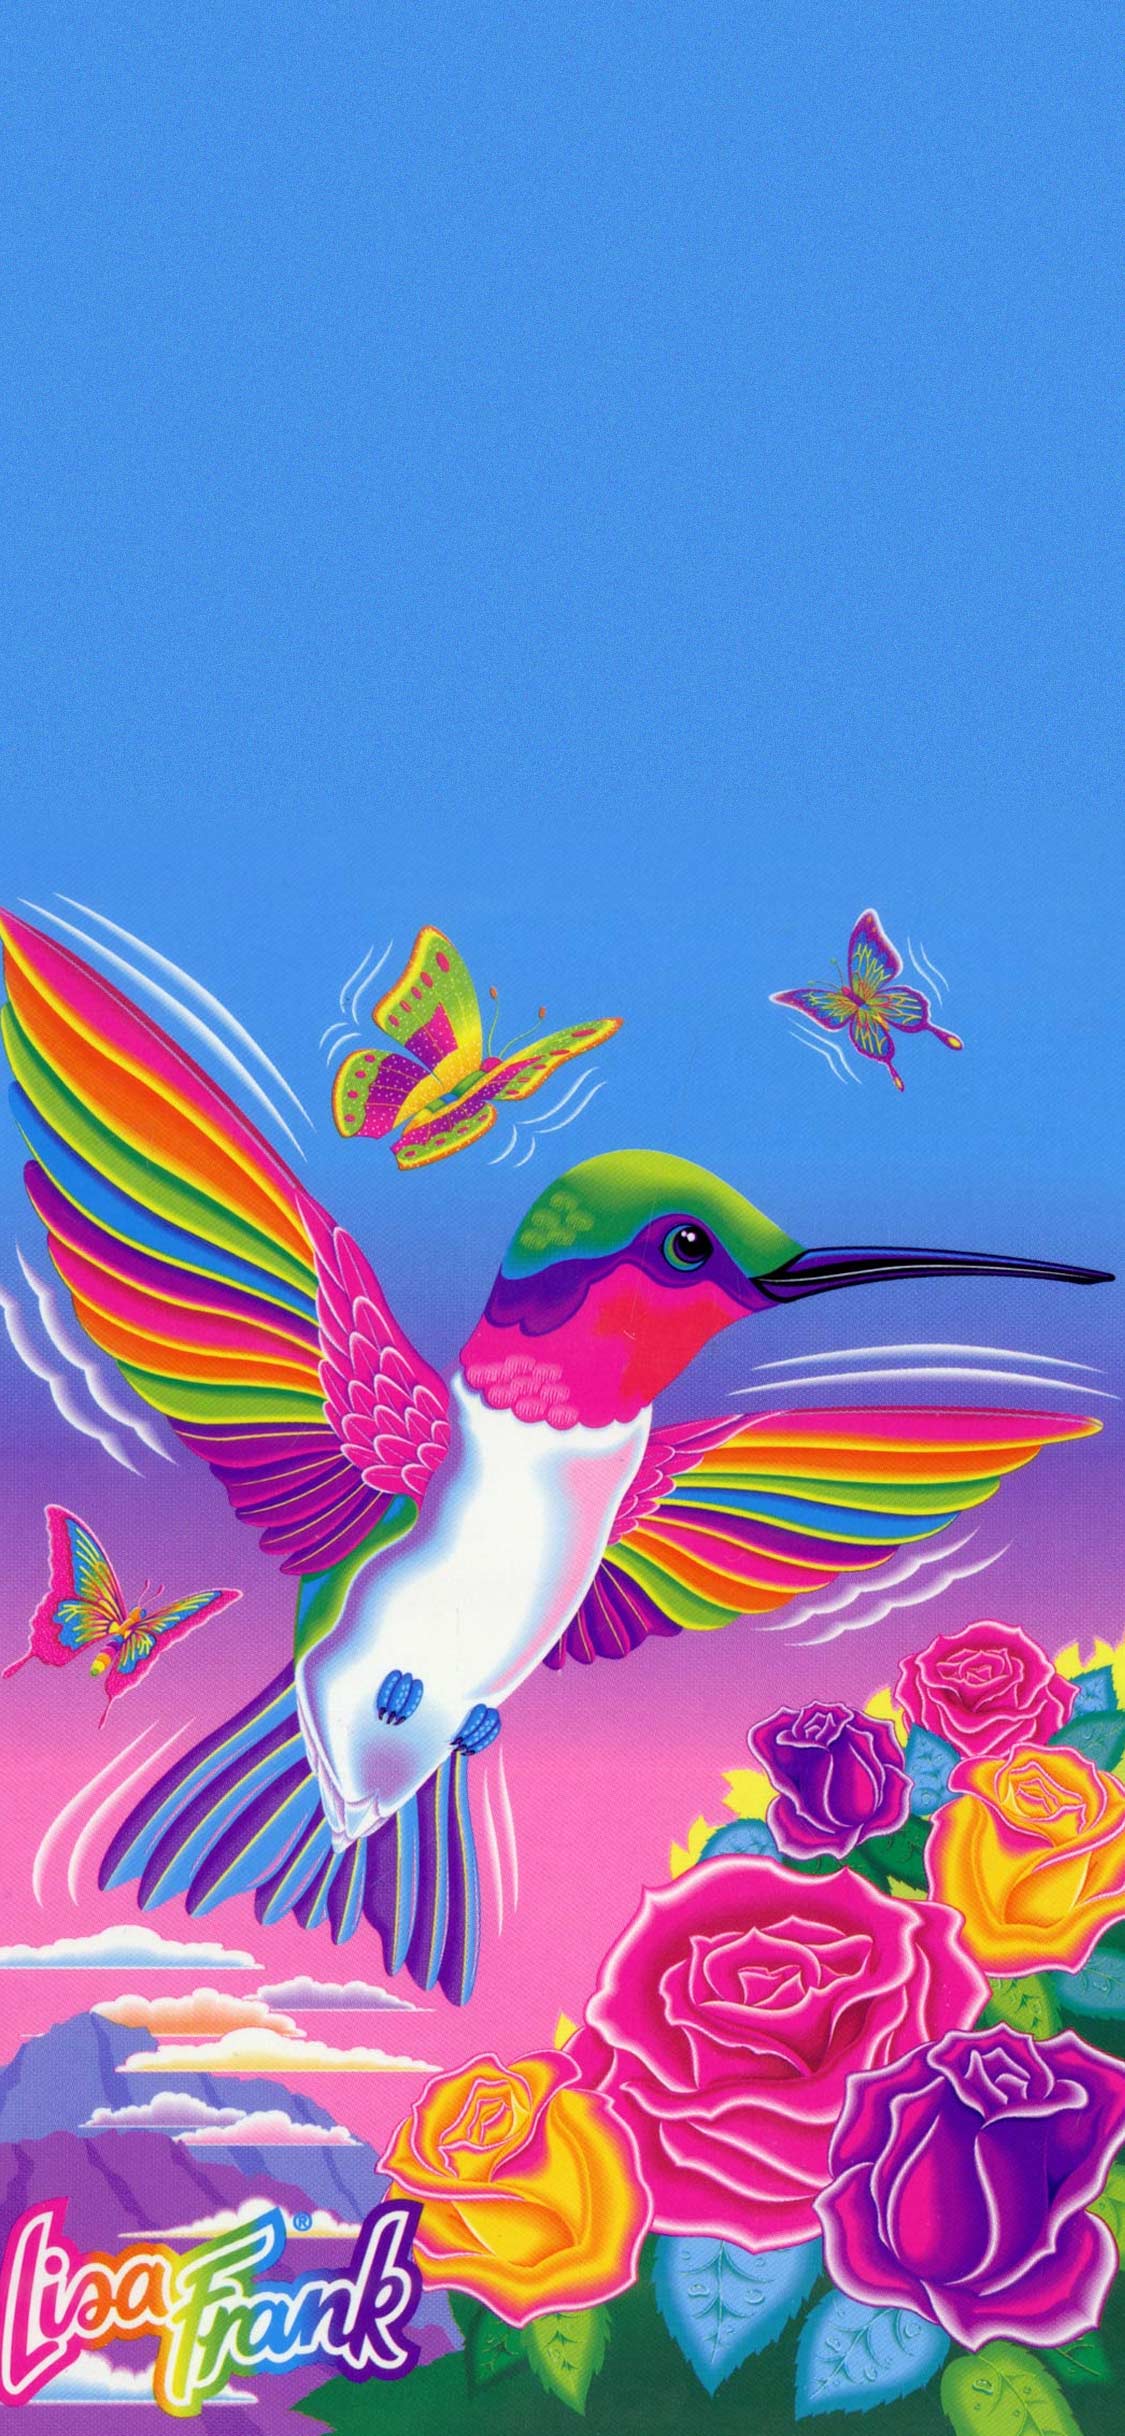  45 Lisa frank  Android iPhone Desktop HD Backgrounds  Wallpapers  1080p 4k 2023